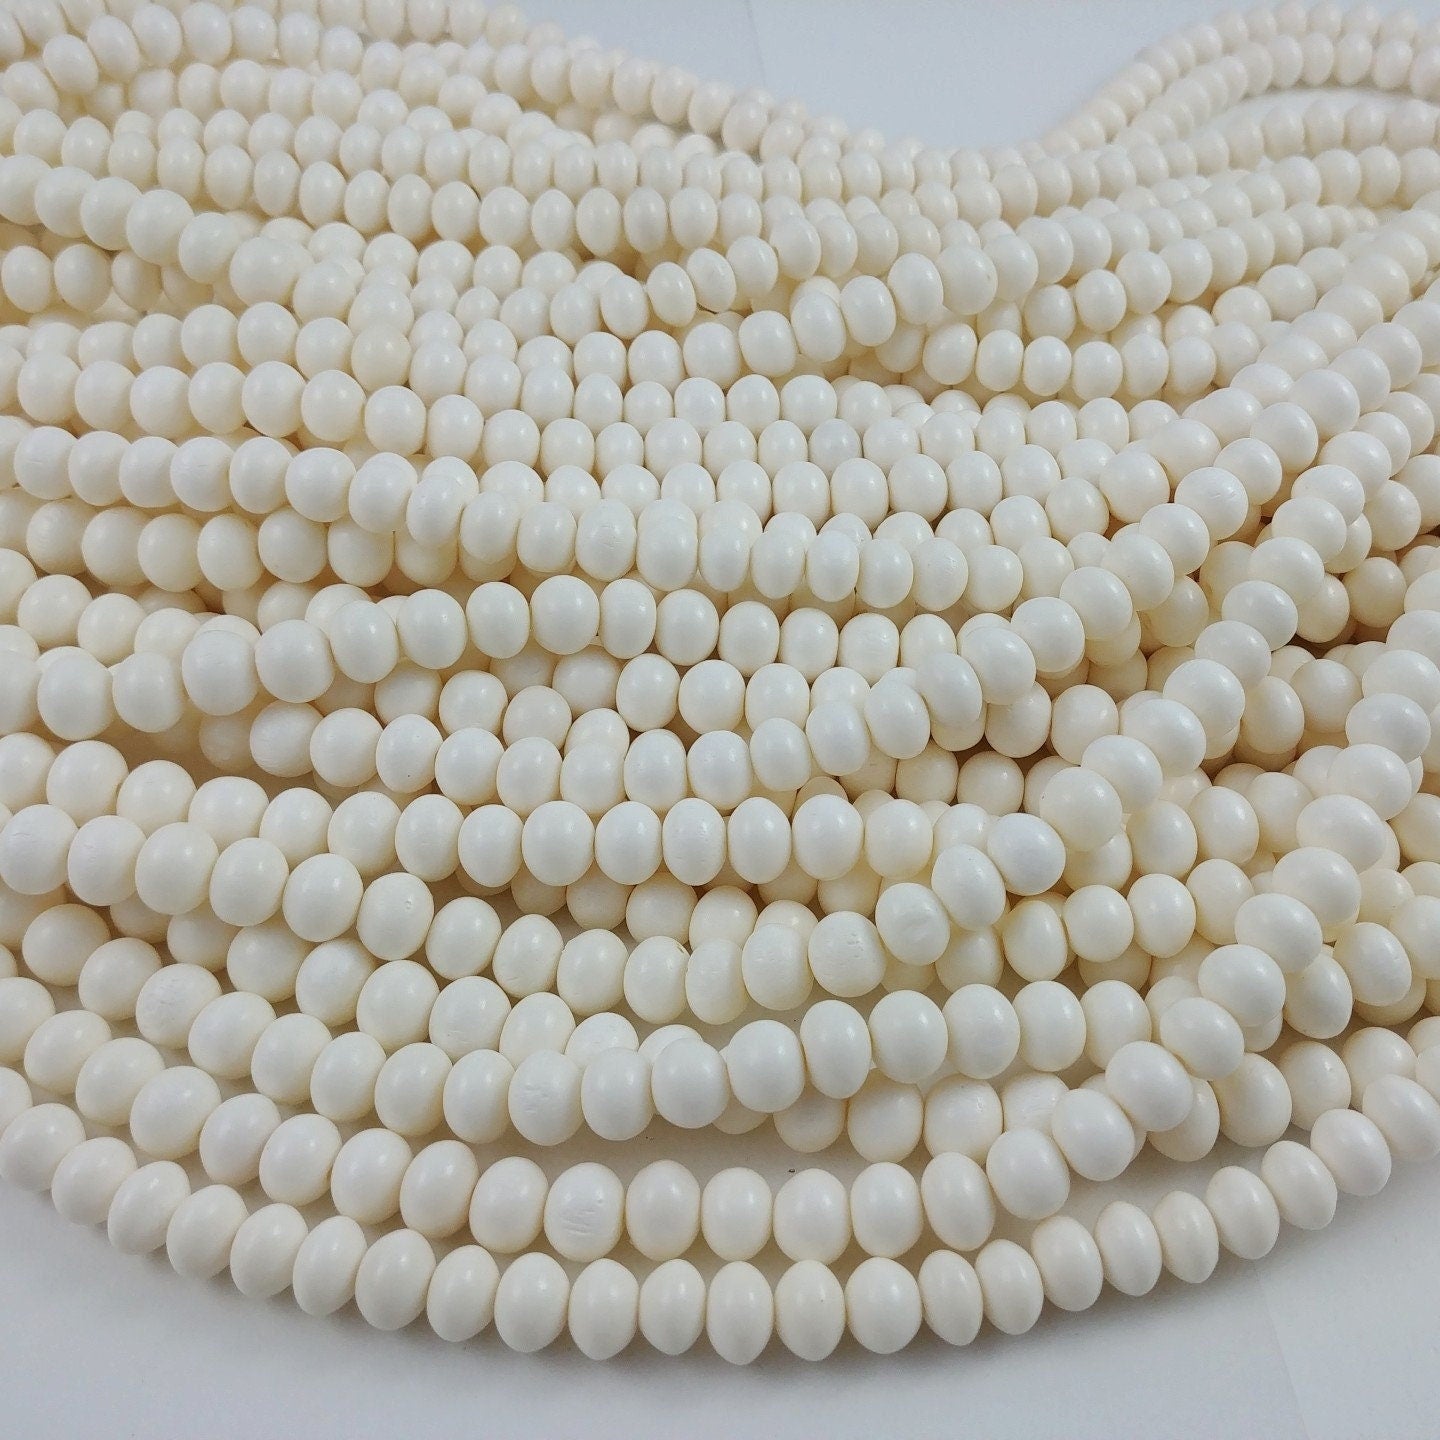 White bone beads, Rondelle beads, Eco friendly, Natural jewelry making